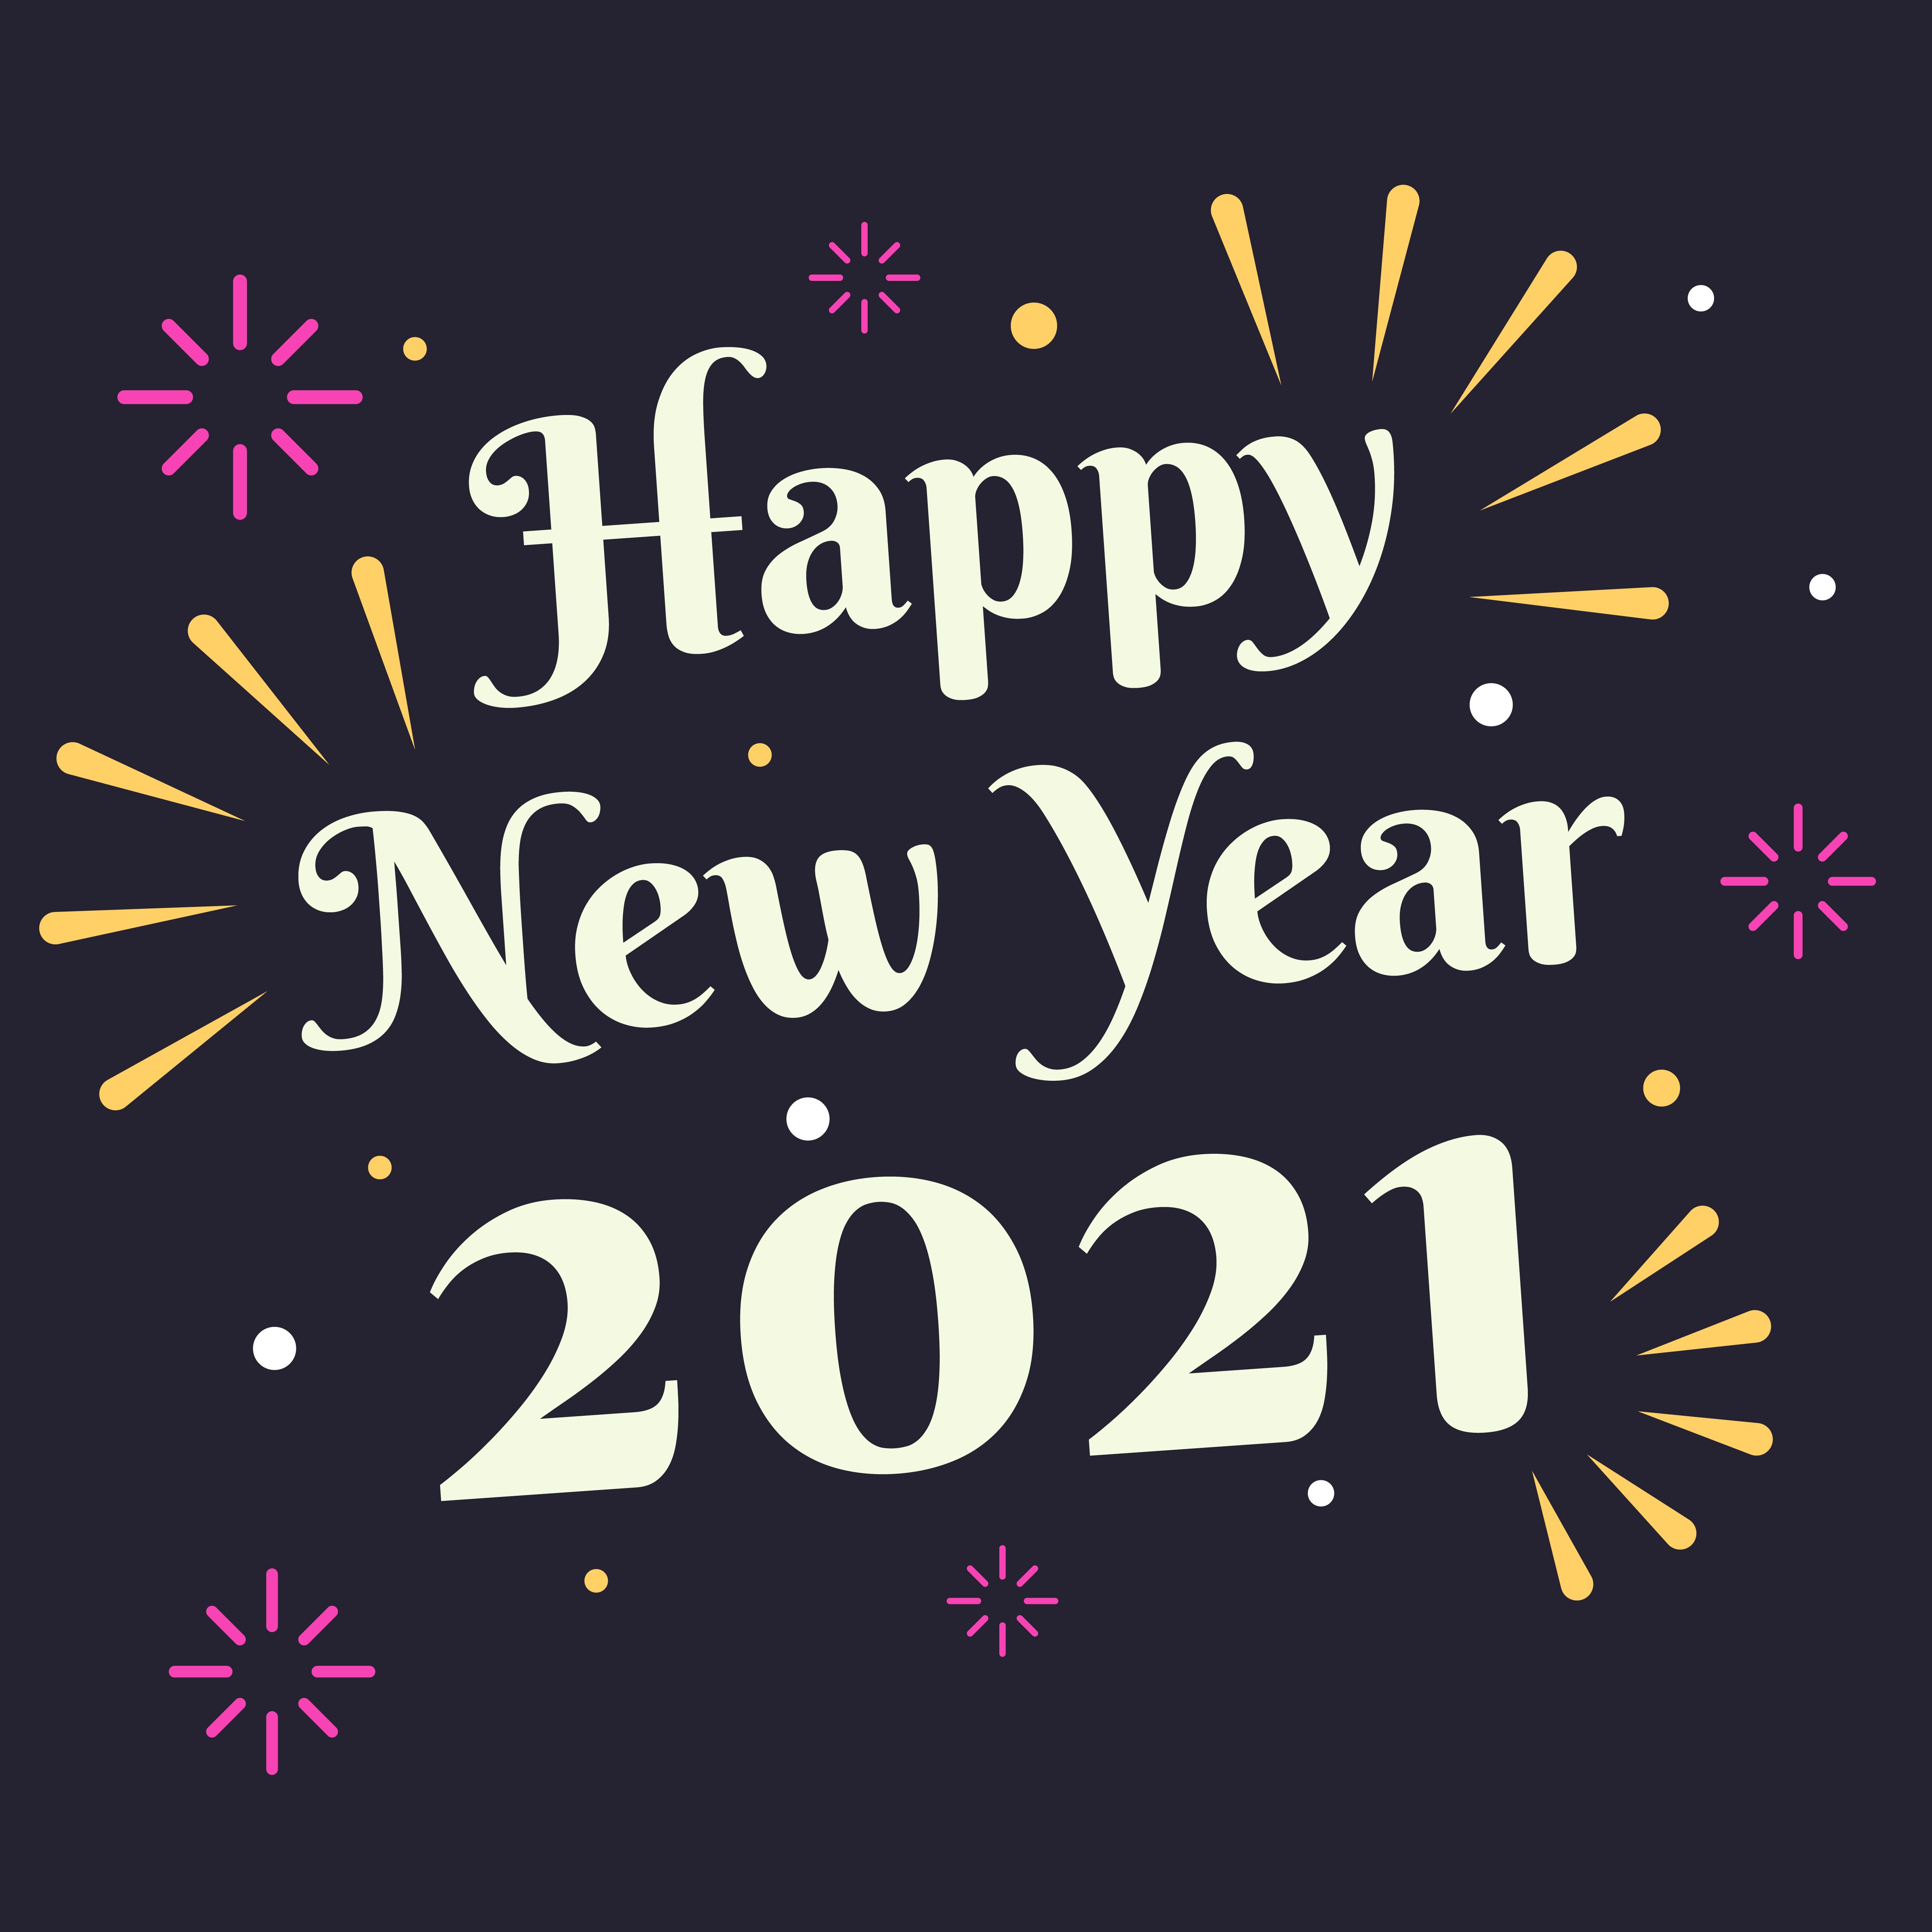 Happy New Year 2021 card with fireworks Free Vectors, Clipart Graphics & Vector Art